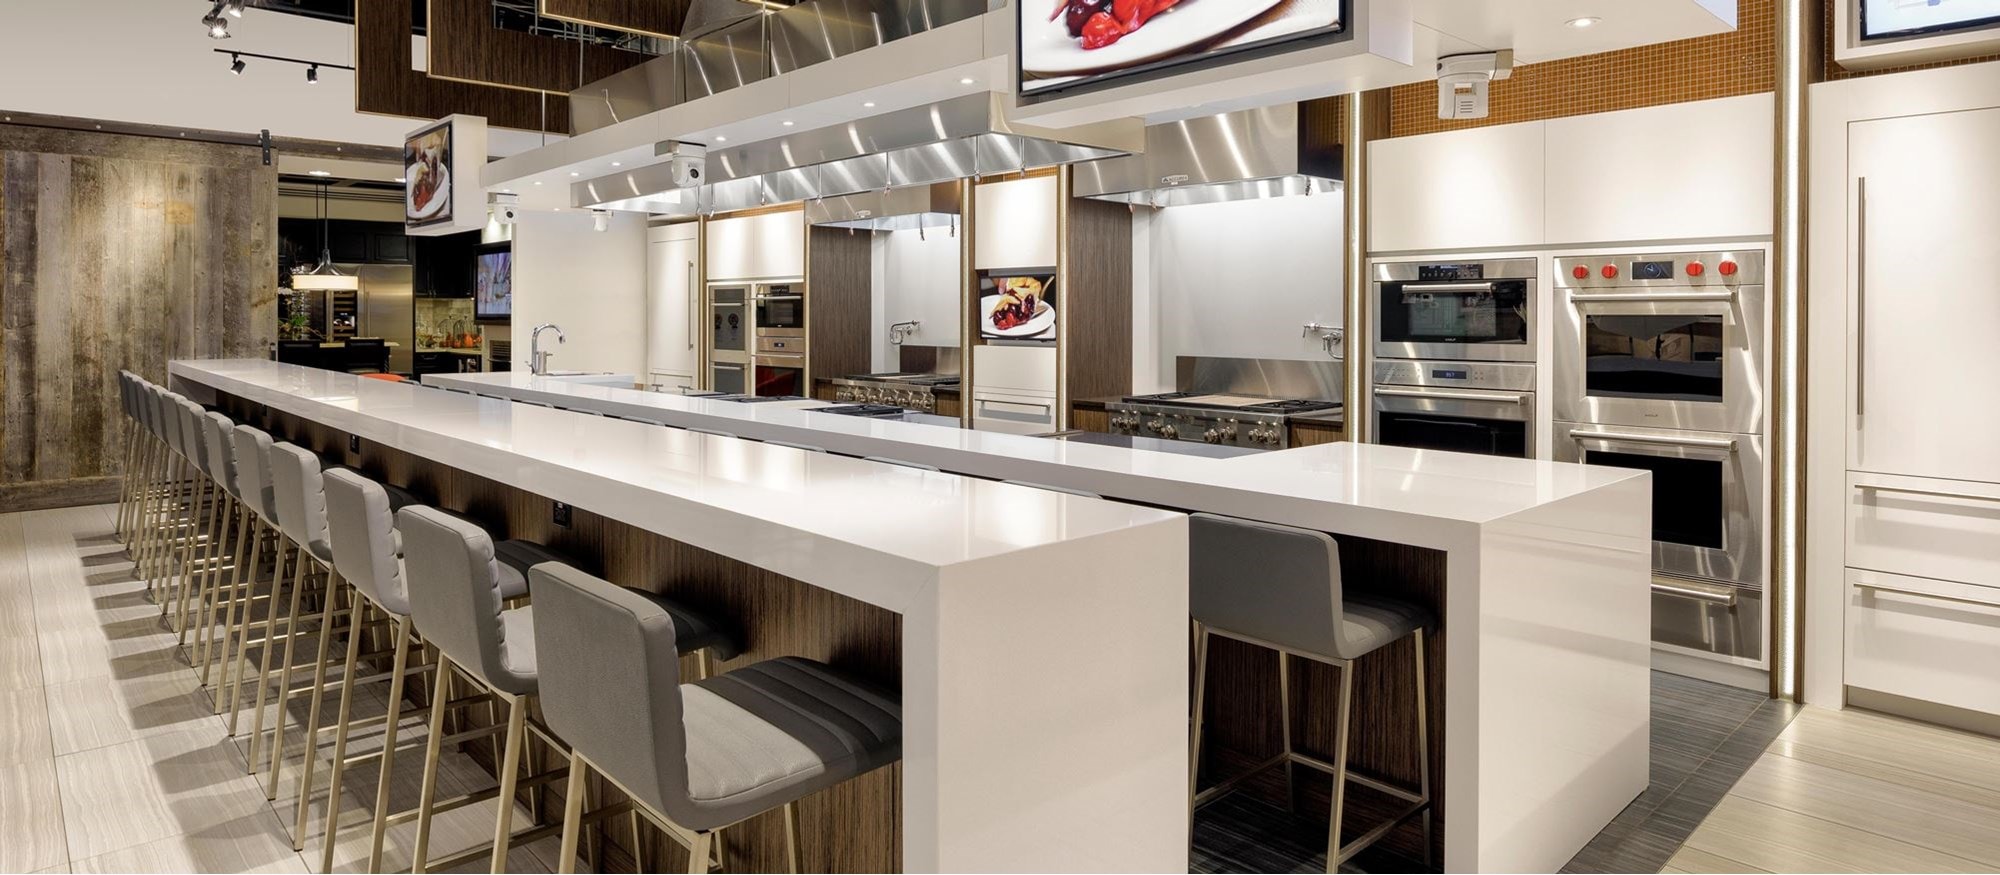 Explore ideas for your new kitchen at Sub-Zero, Wolf and Cove Showroom in Charlotte, North Carolina